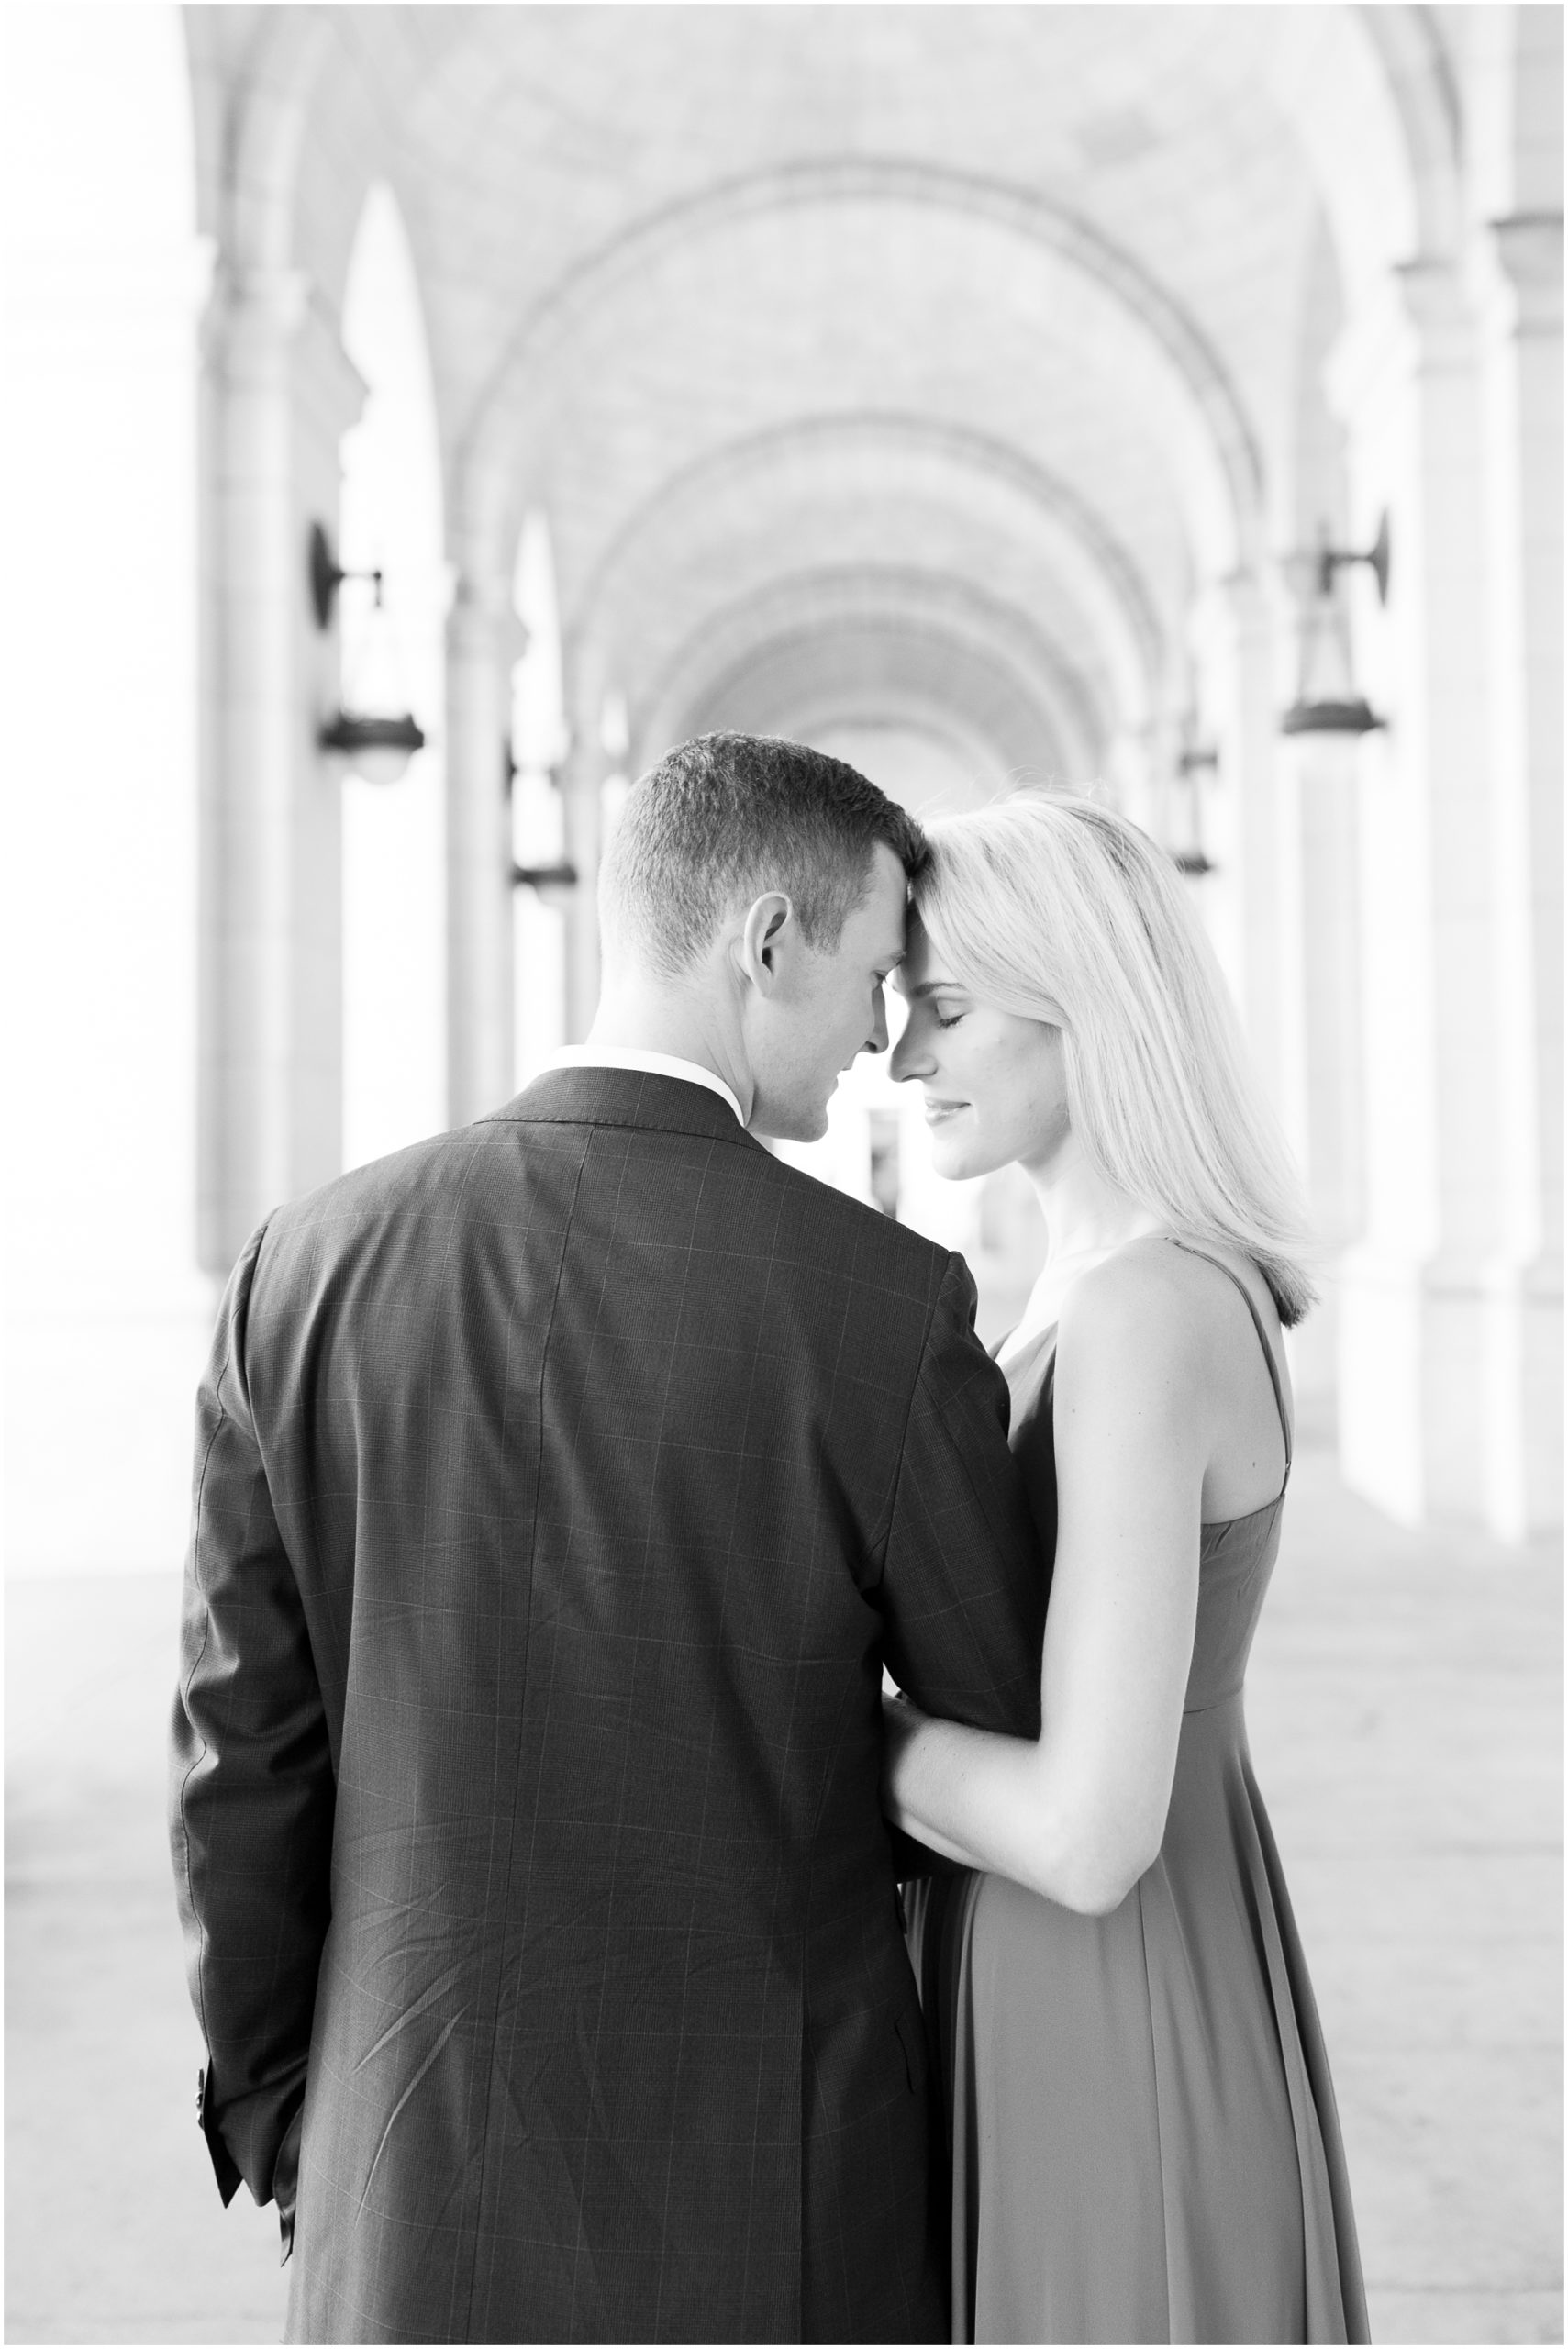 Black tie DC wedding venue Union Station wedding captured by Taylor Rose Photography